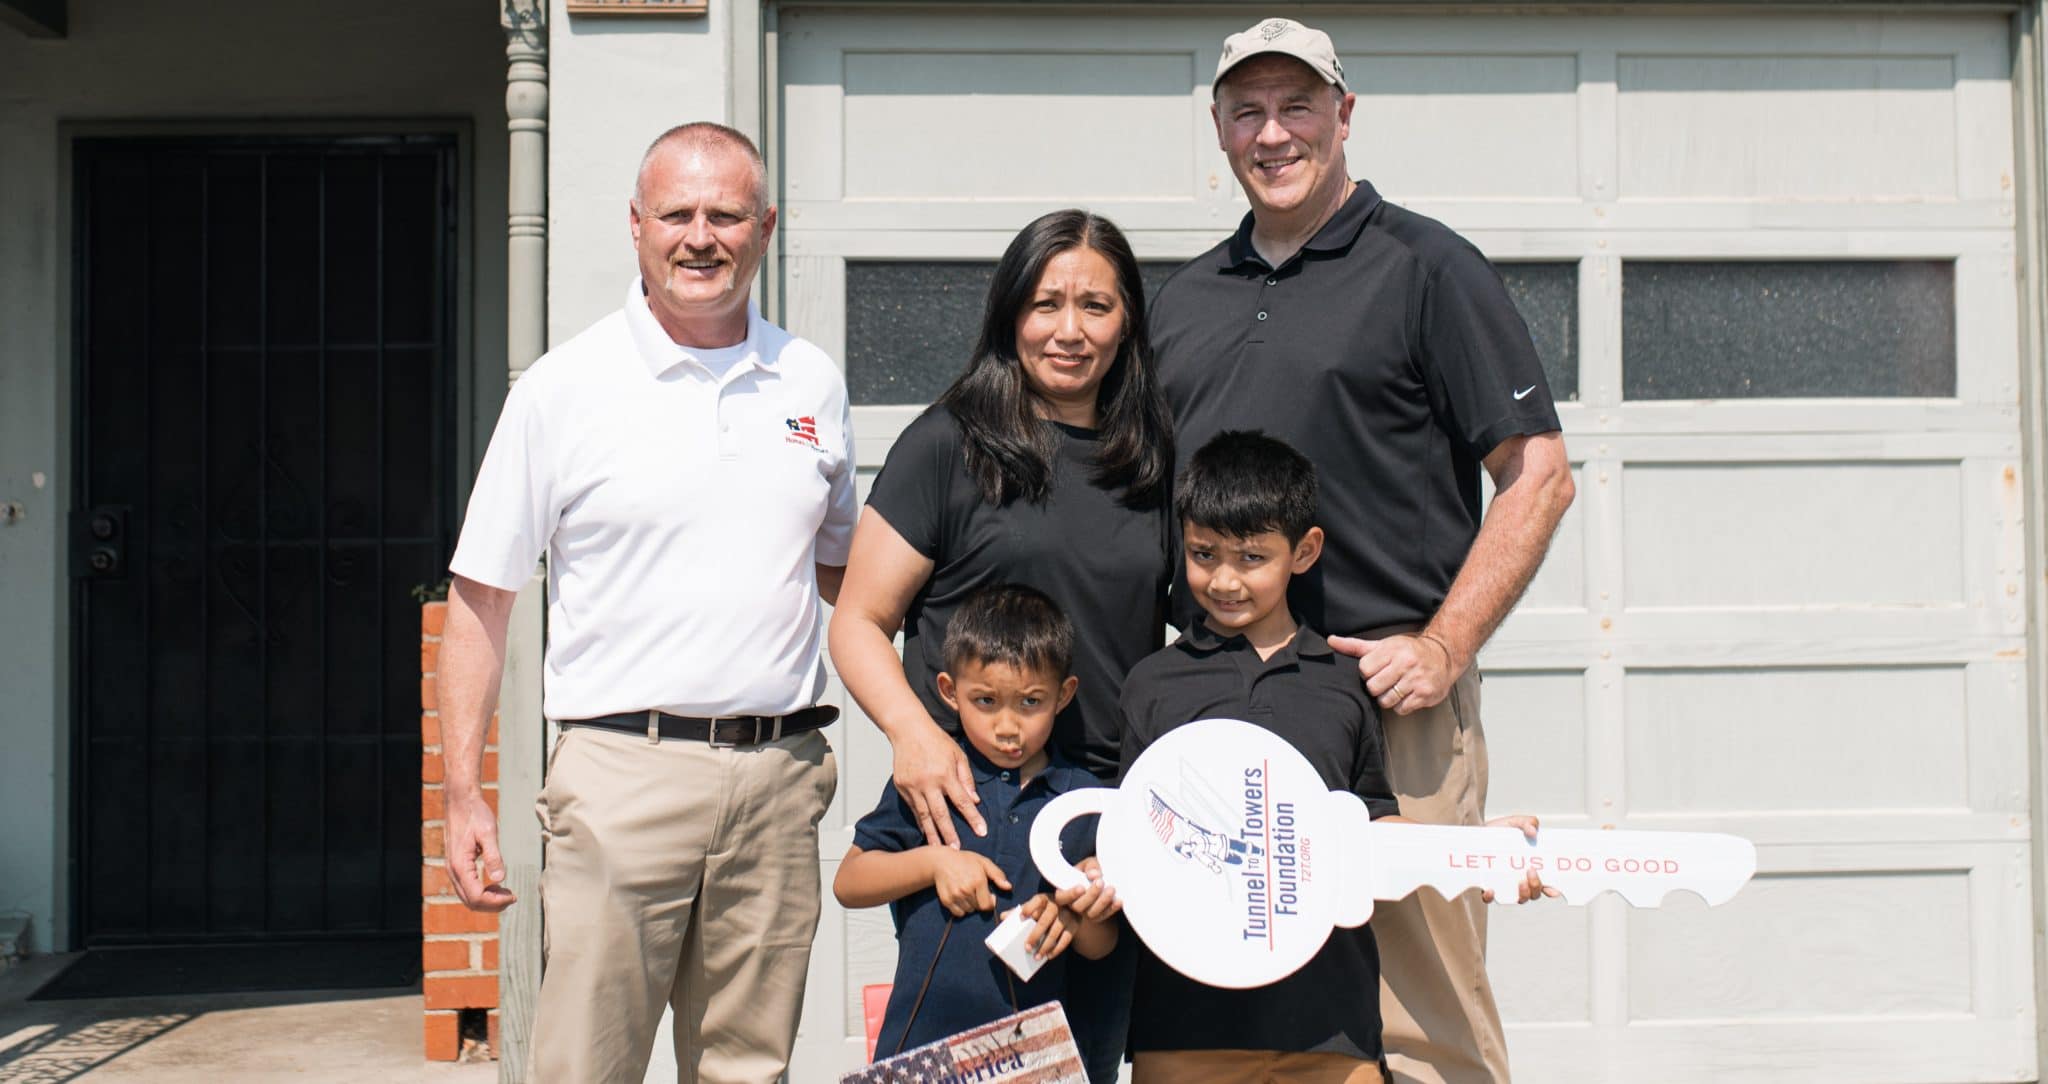 Representatives from Homes for Heroes Foundation and Tunnel to Towers stand with Patricia Cortez and her two sons in front of their San Francisco home